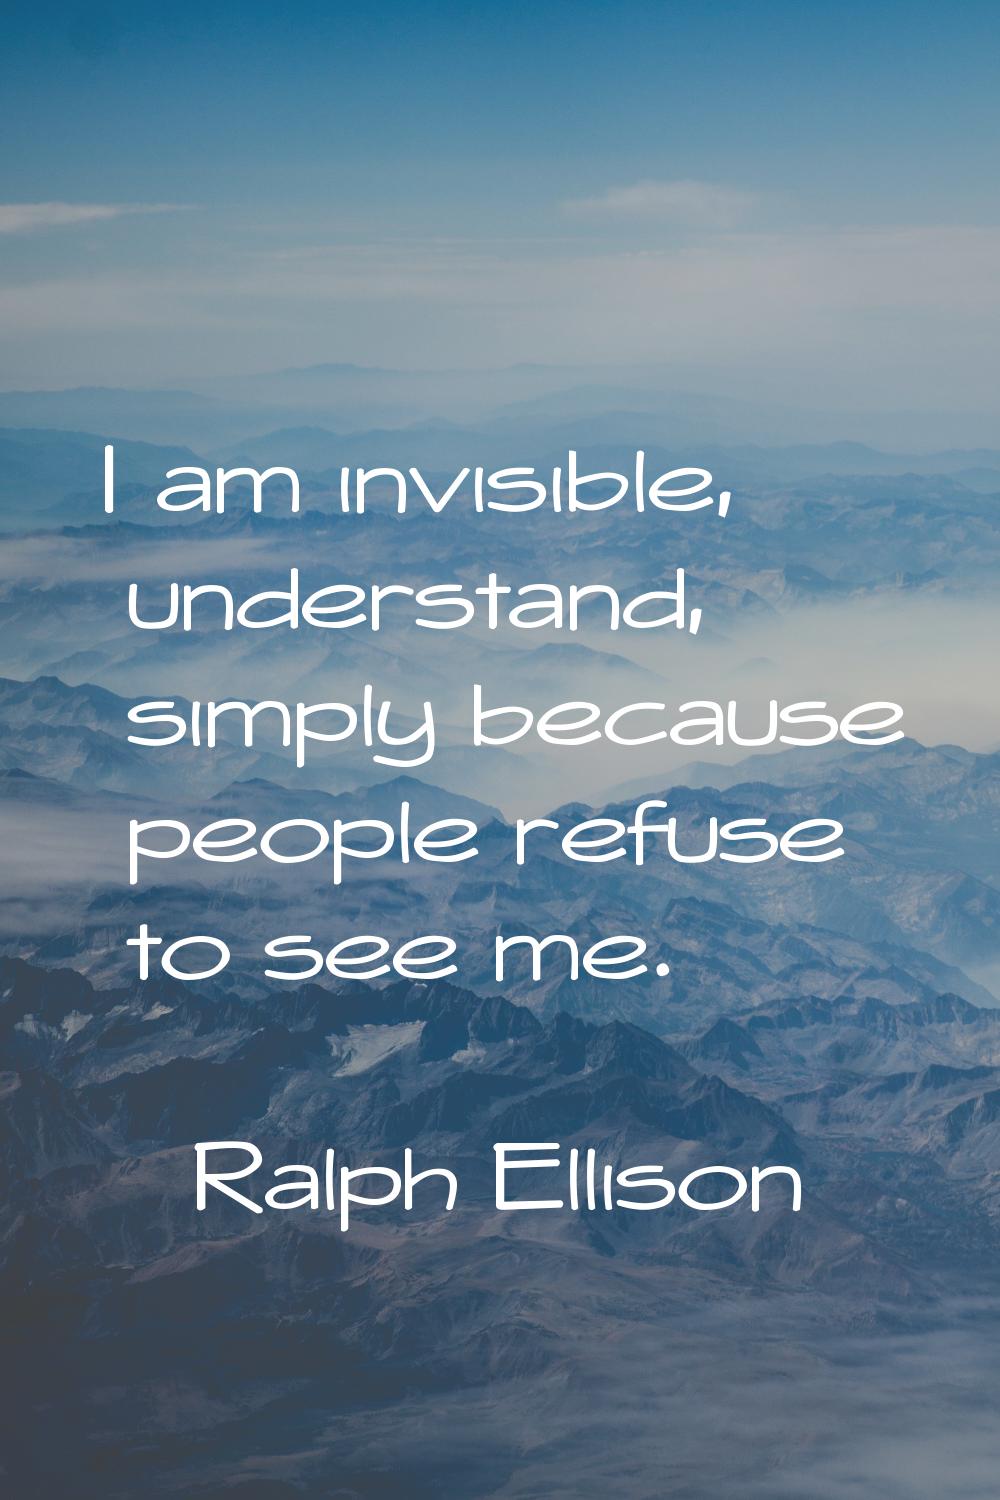 I am invisible, understand, simply because people refuse to see me.